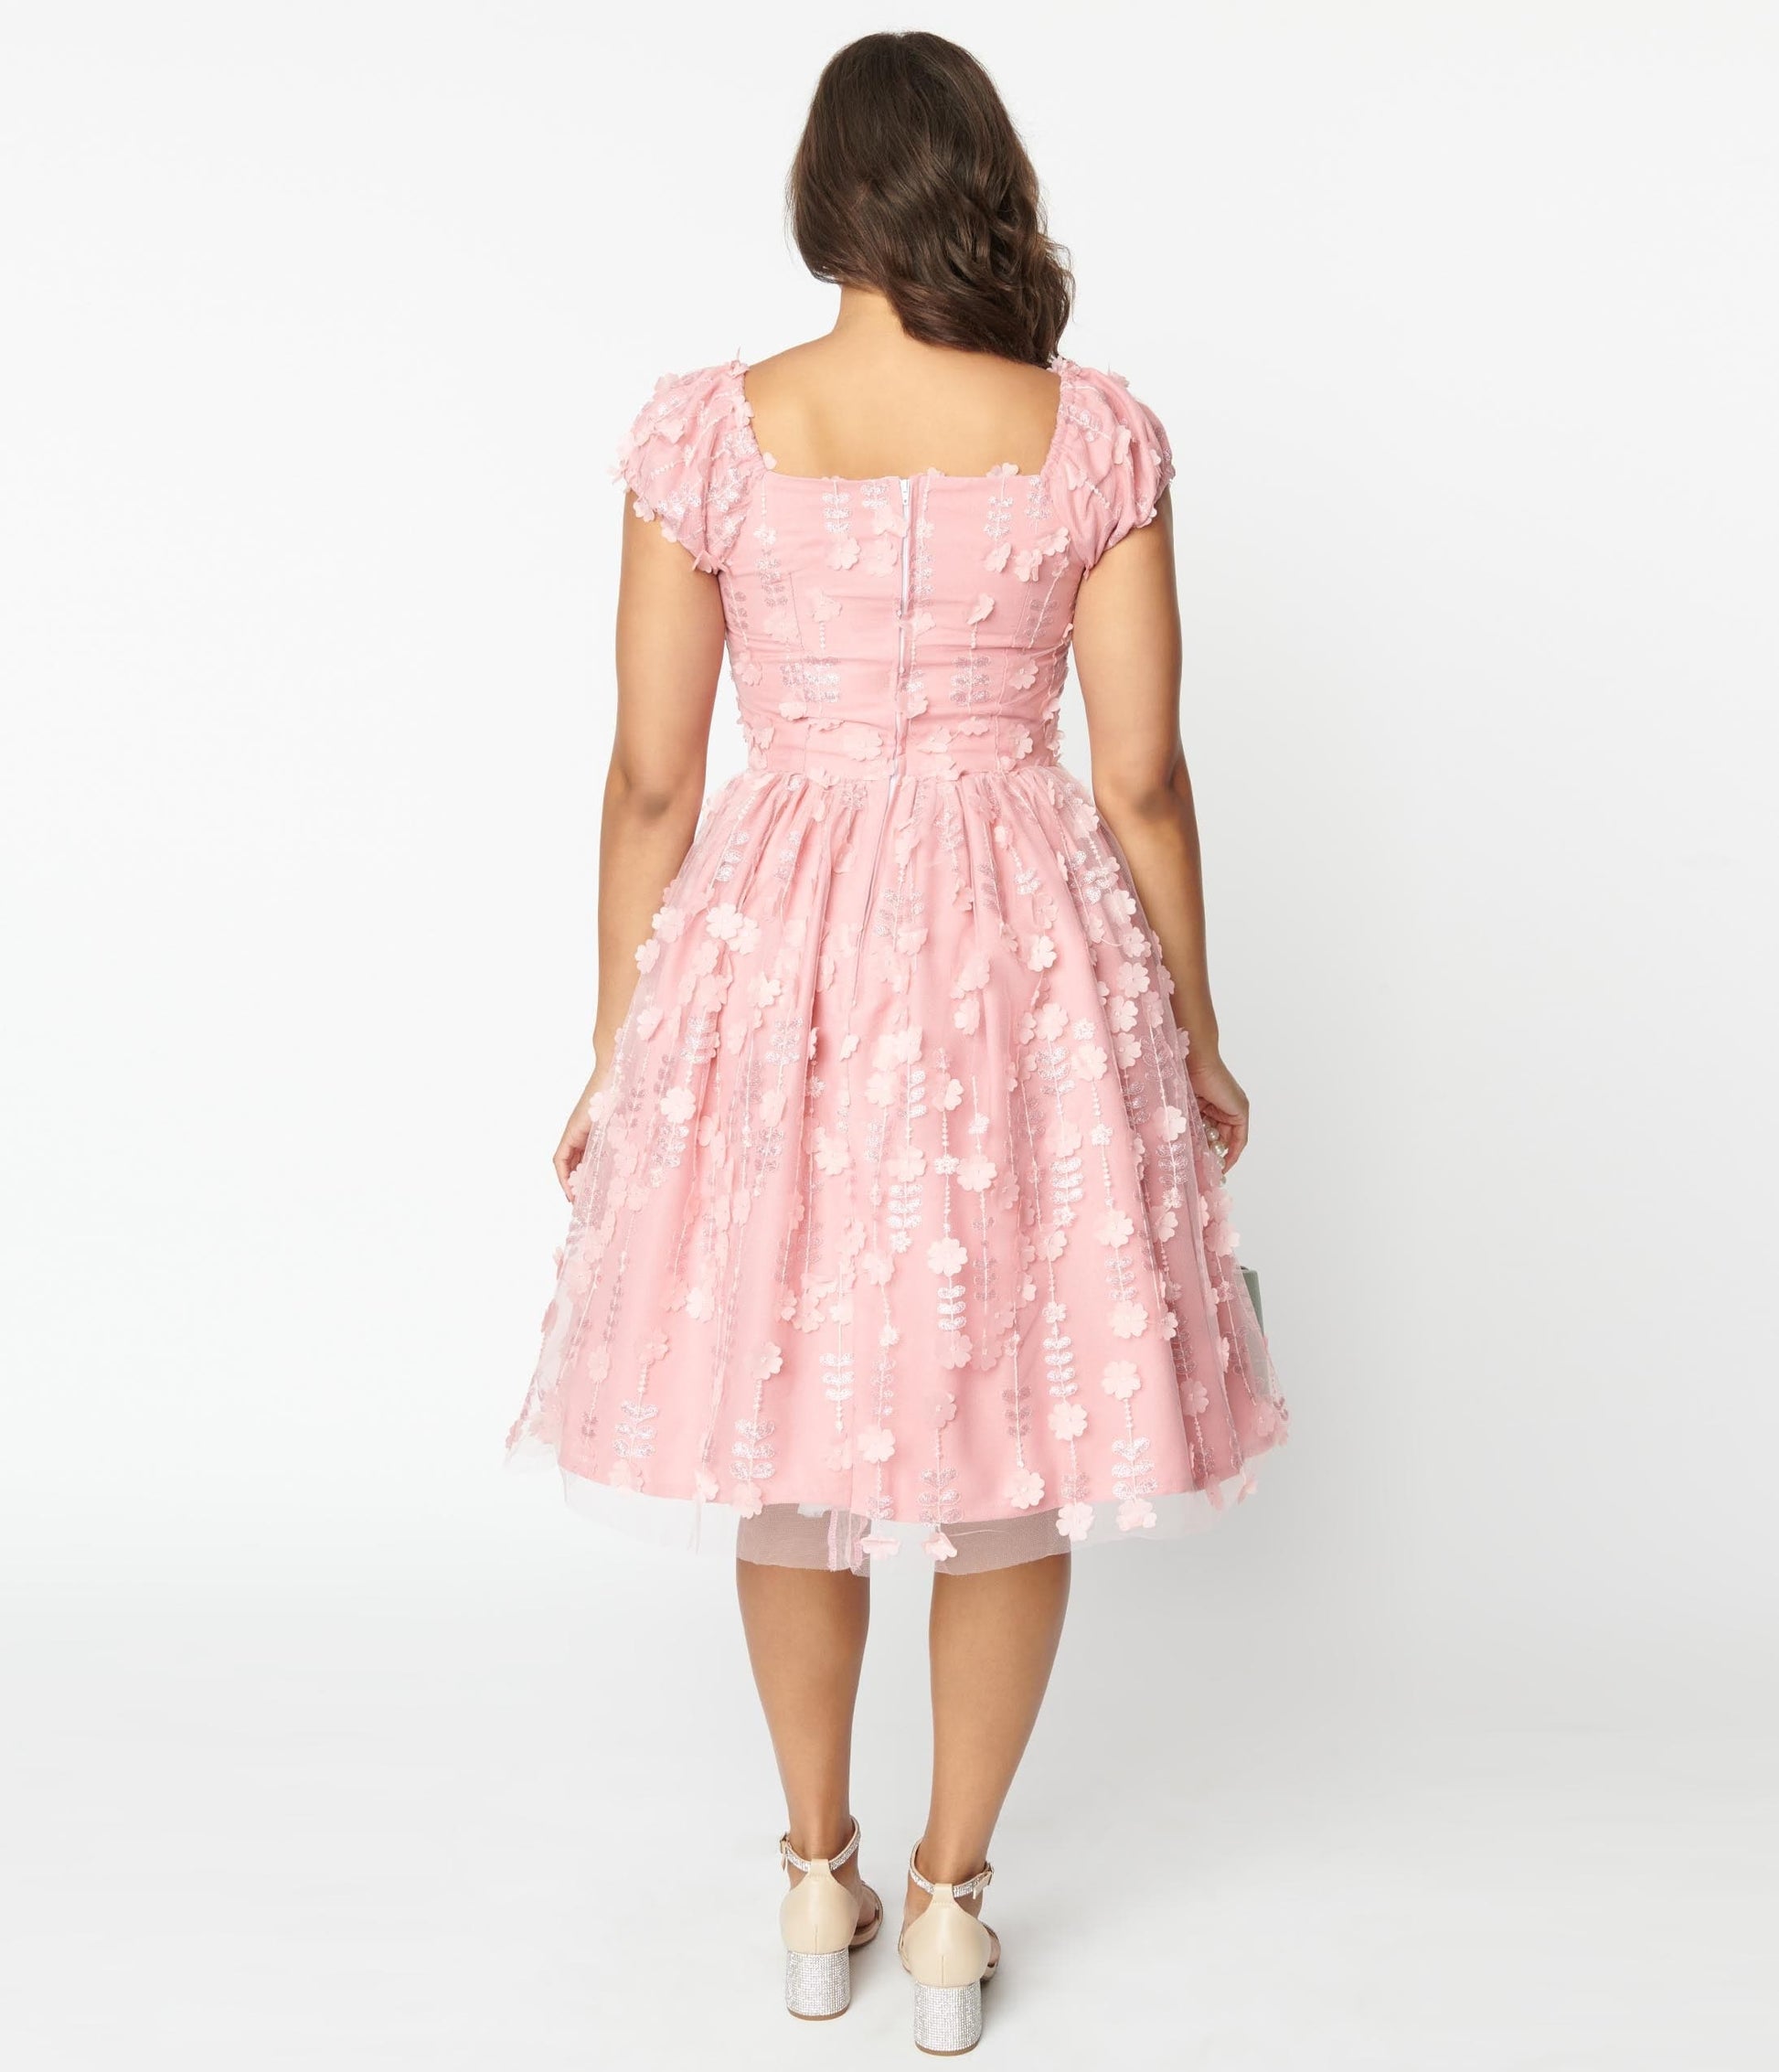 Magnolia Place Pink Sequin Floral Swing Dress